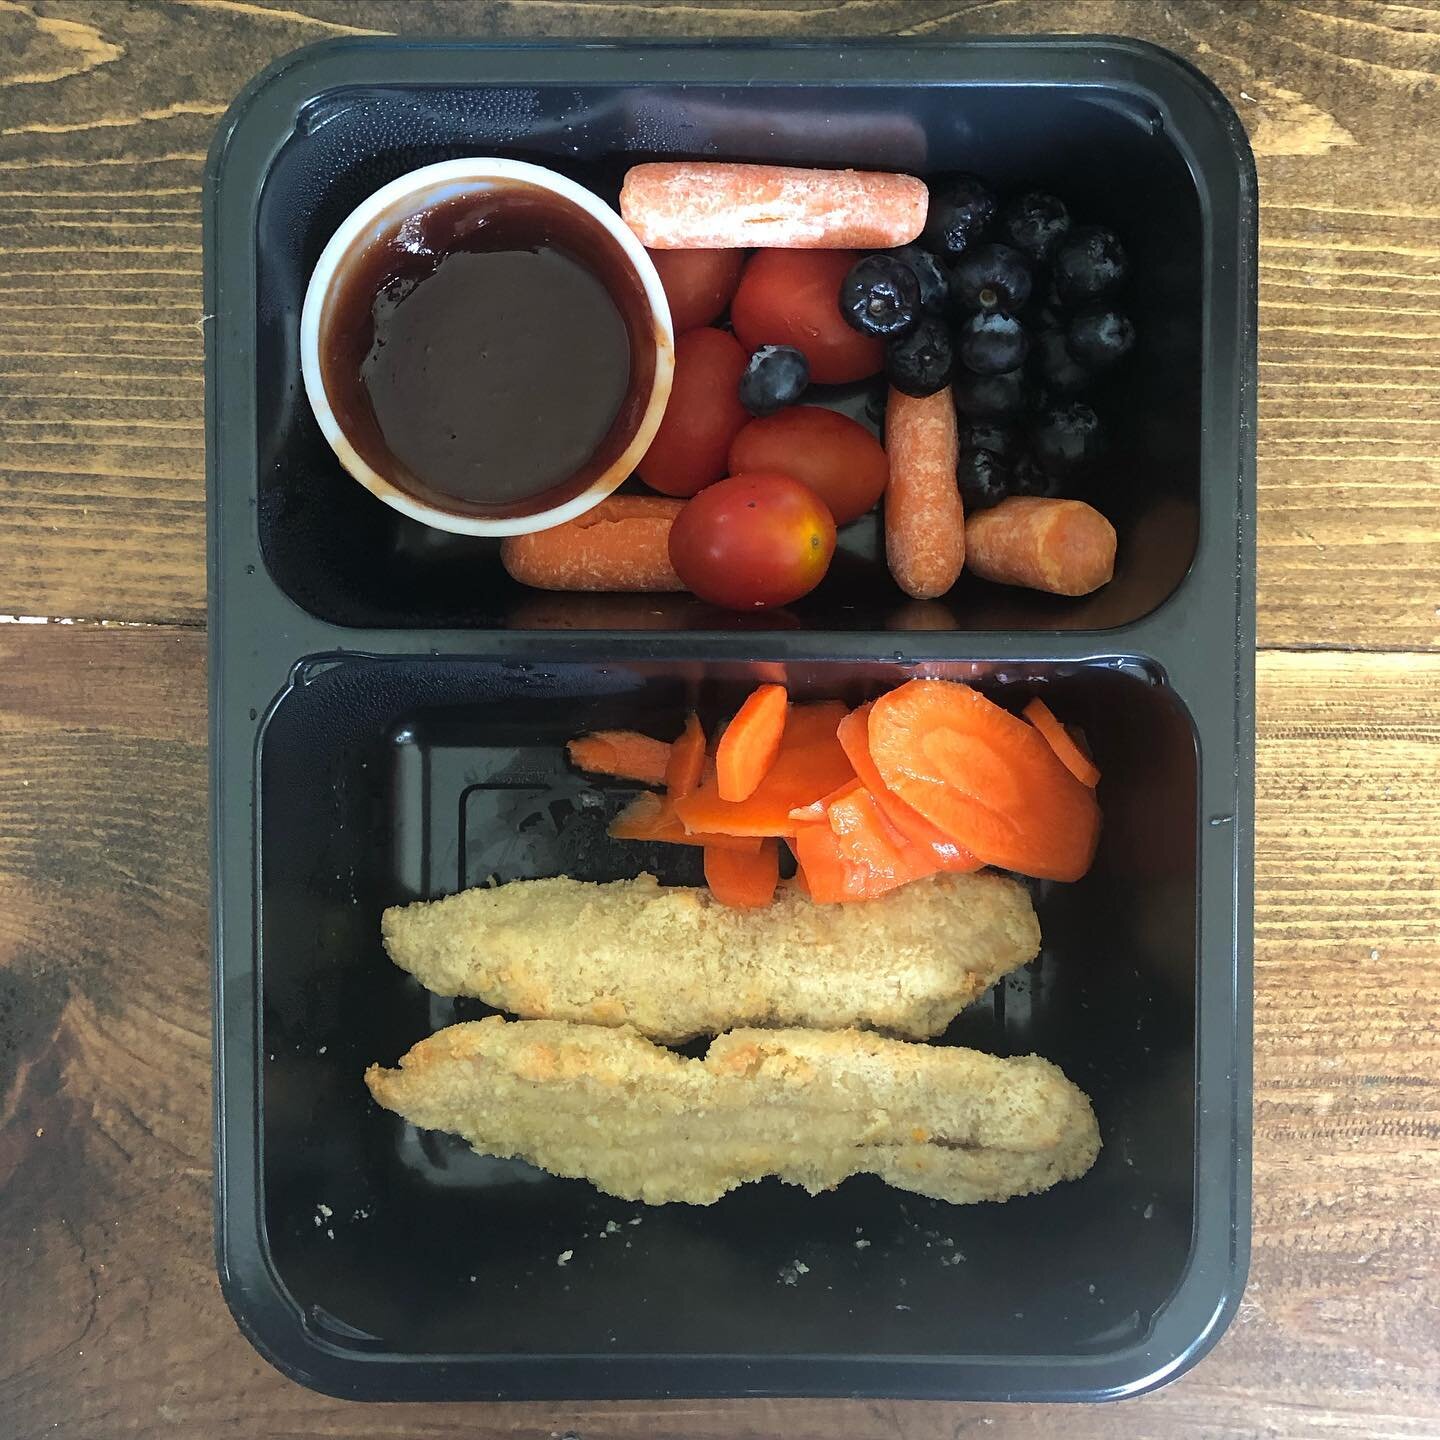 The best part about having lunch already made up is that I could spend more time outside with the kids, instead of having to sneak off to assemble lunch!
.
We had the almond crusted chicken tenders from @eatcooked and I added some fermented ginger ca